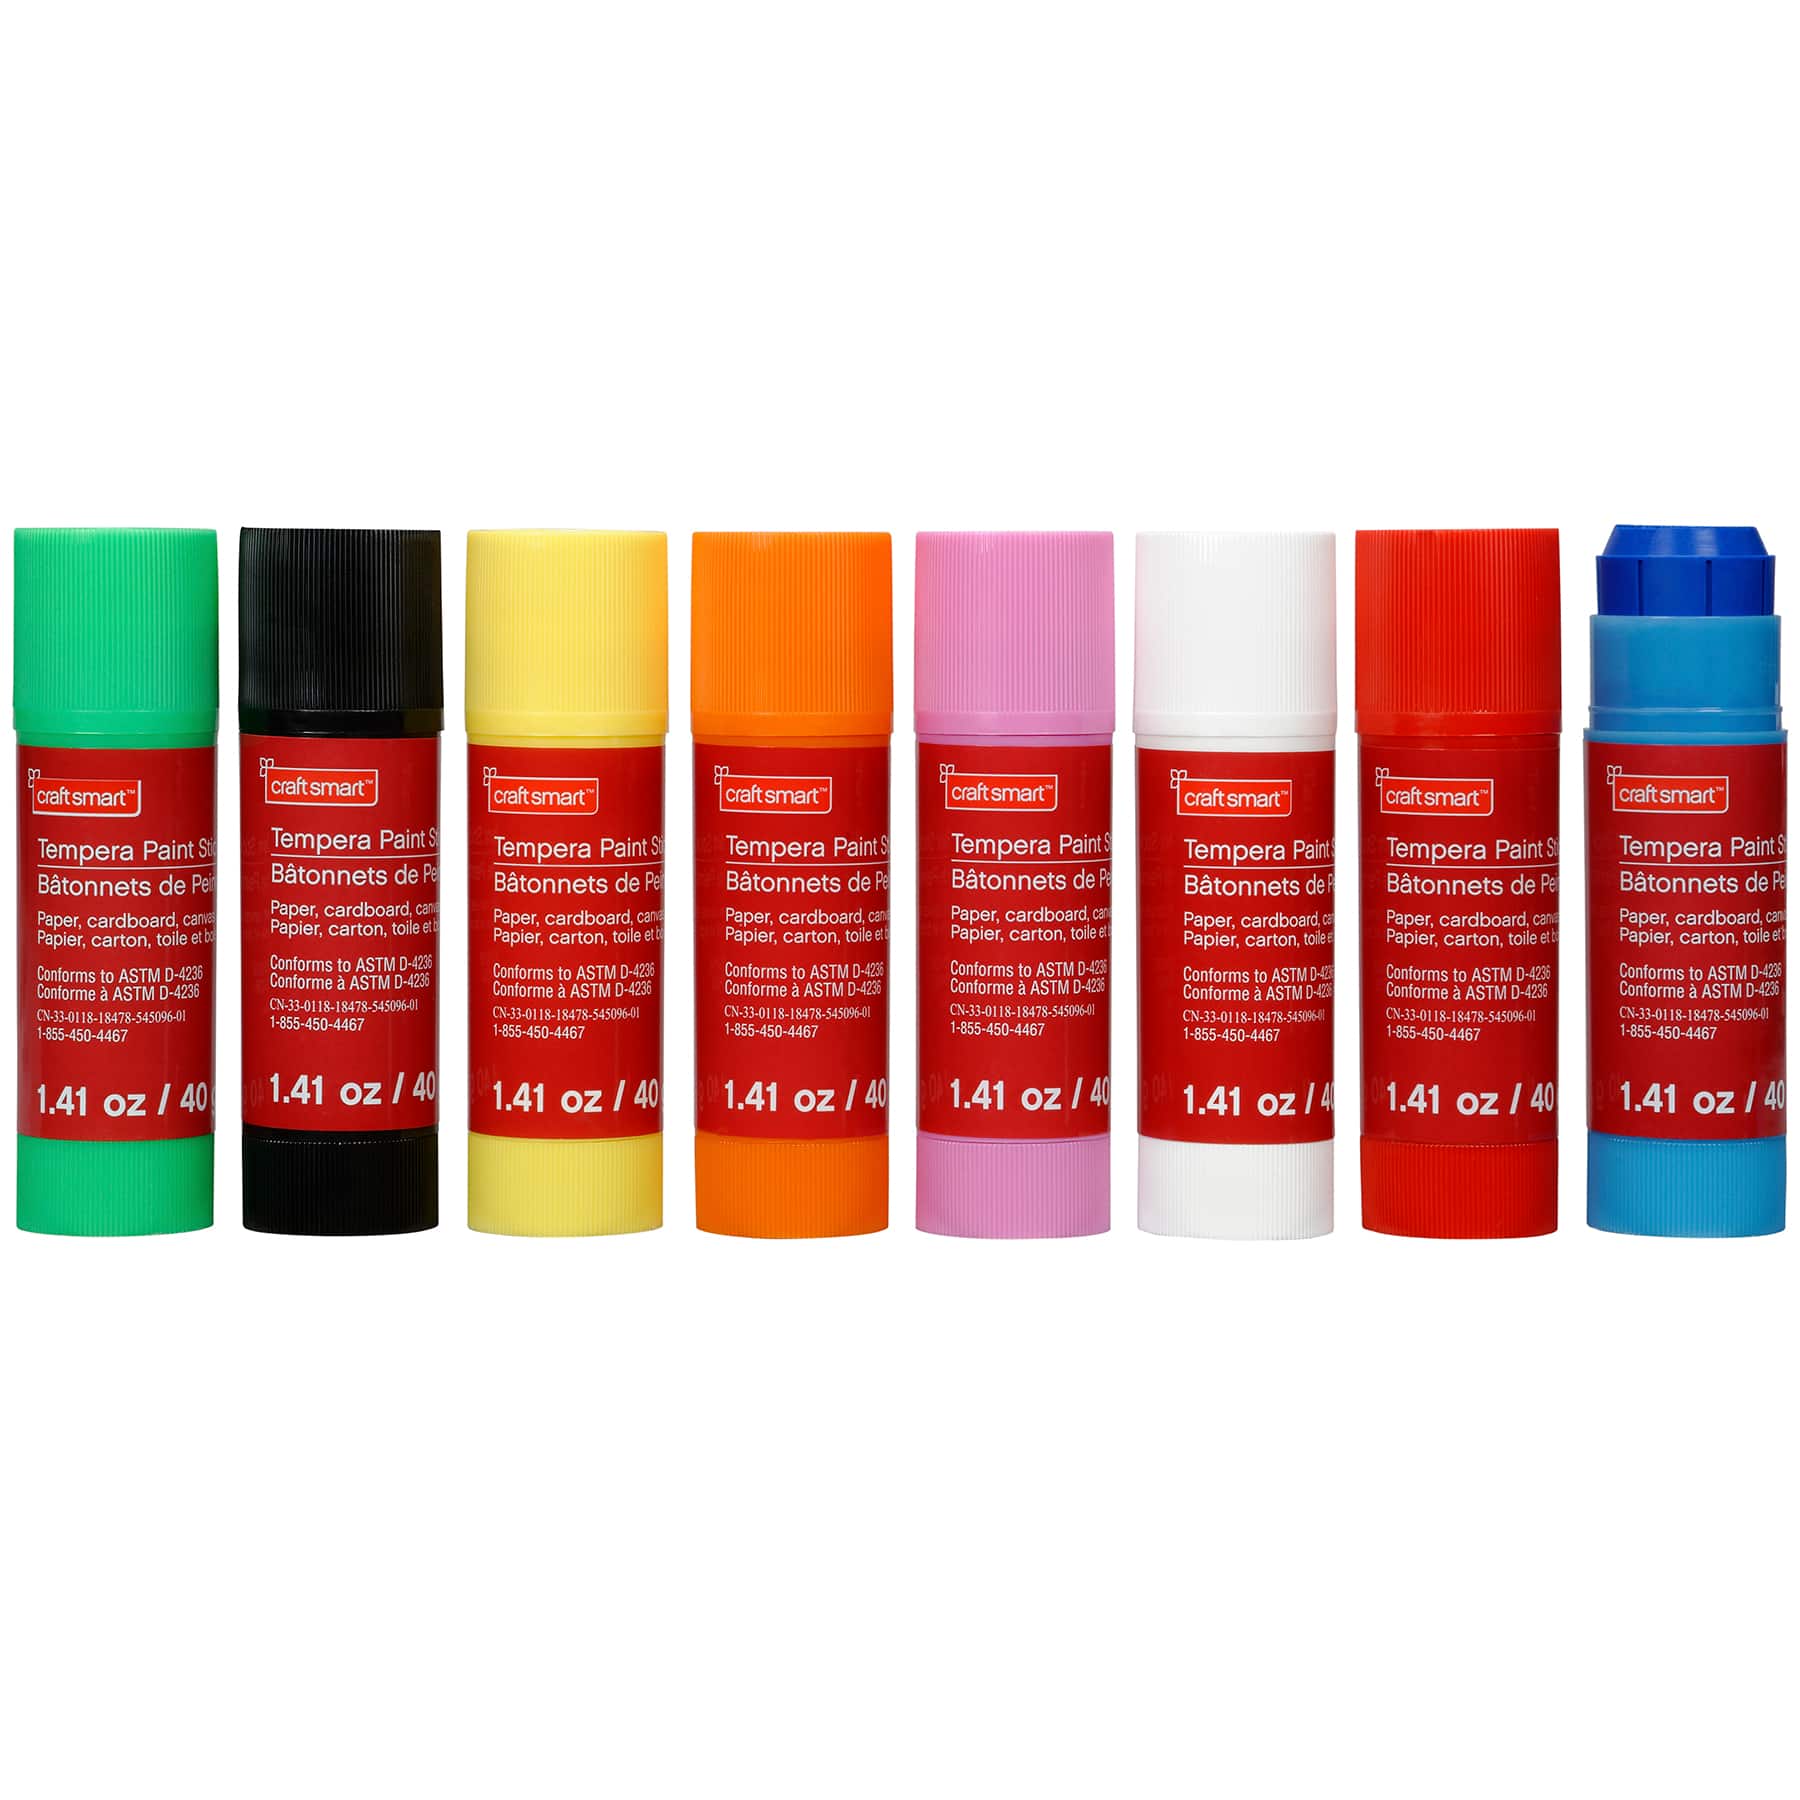 8 Count Basic Tempera Paint Sticks Pack By Craft Smart&#x2122;